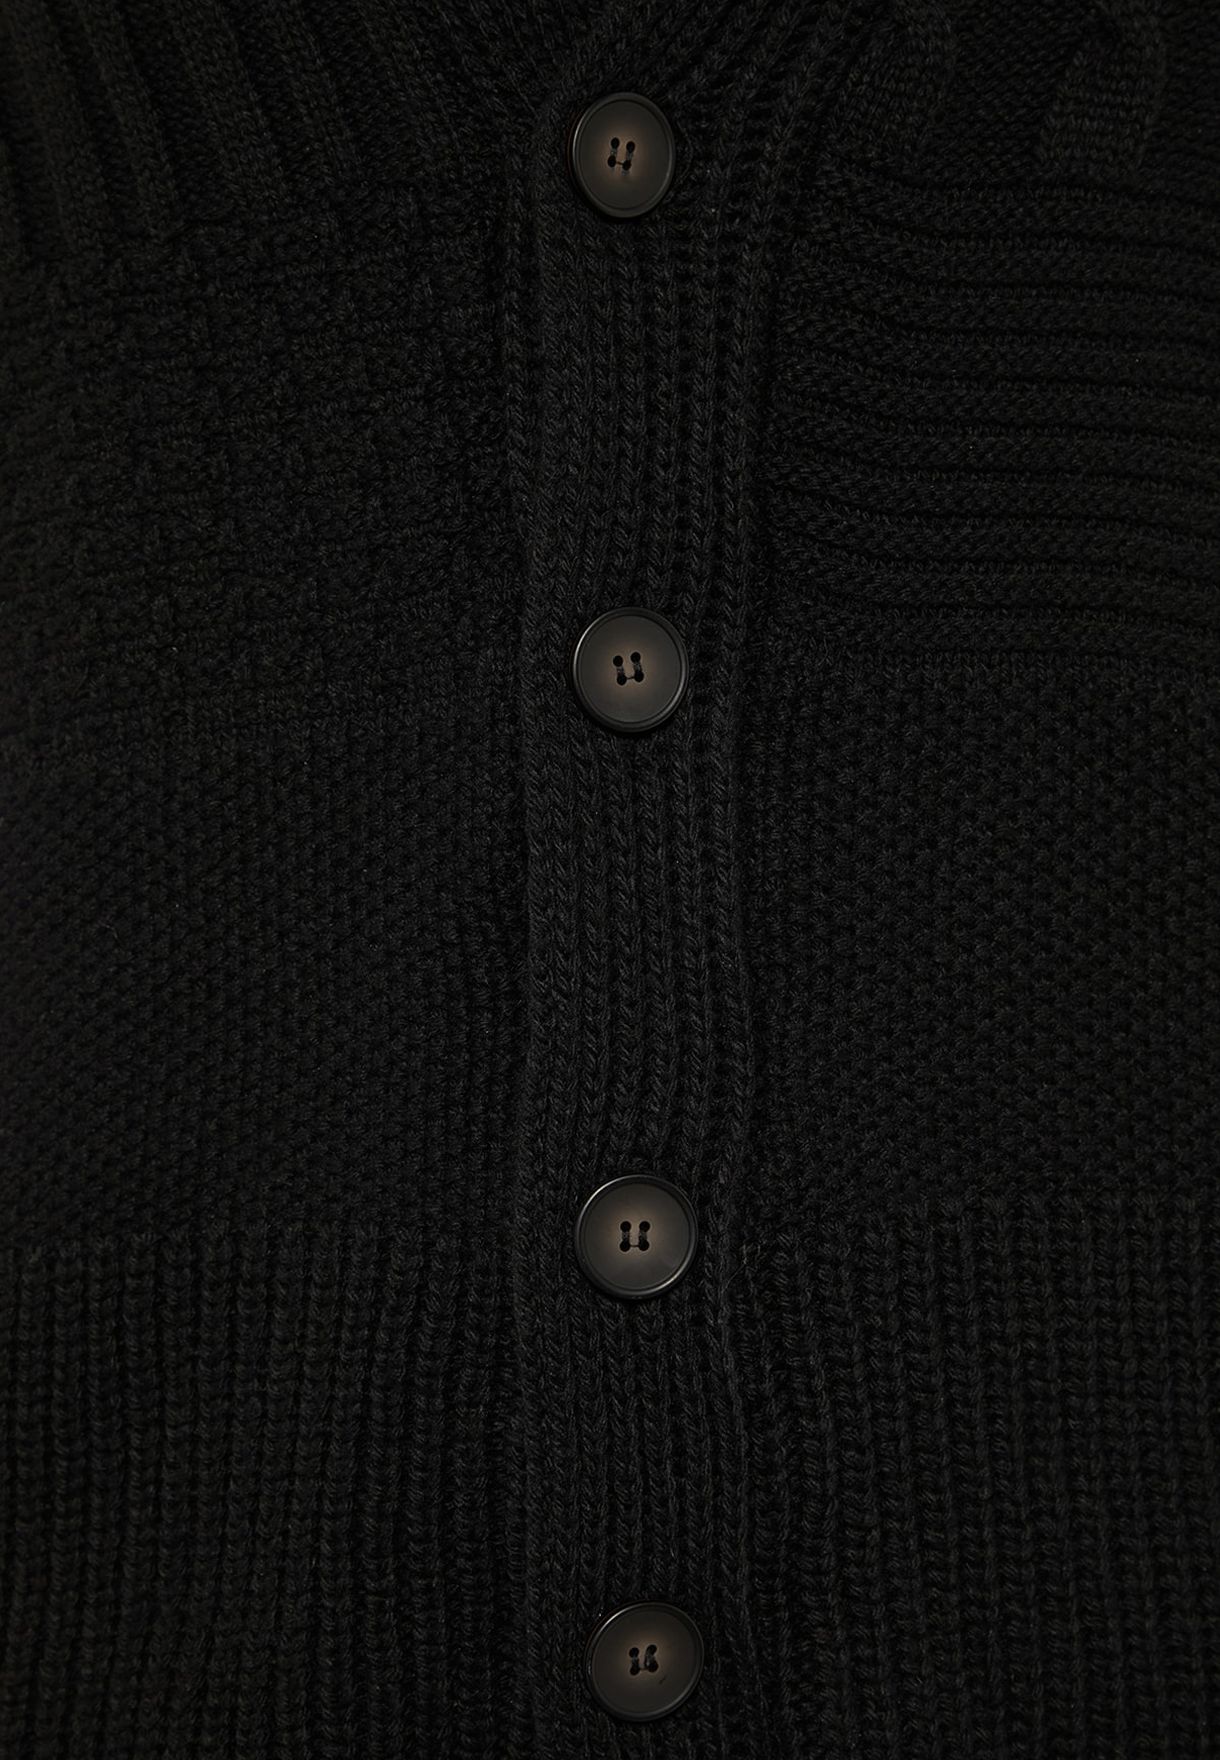 Shawl Neck Knitted Button Cardigan